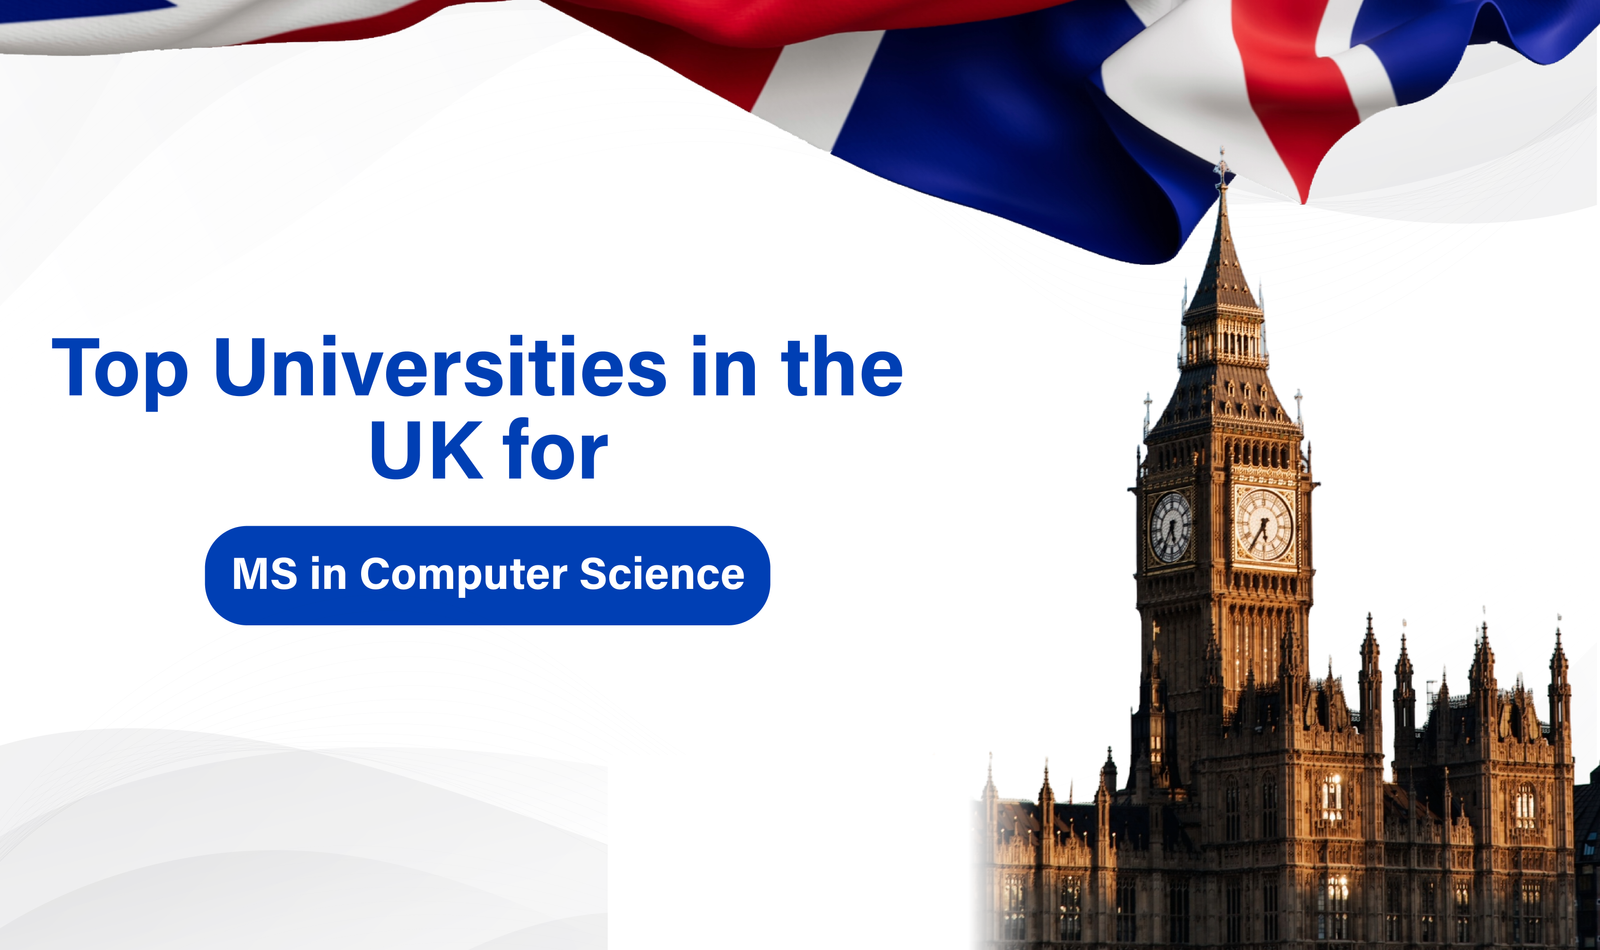 Top Universities in the UK for MS in Computer Science